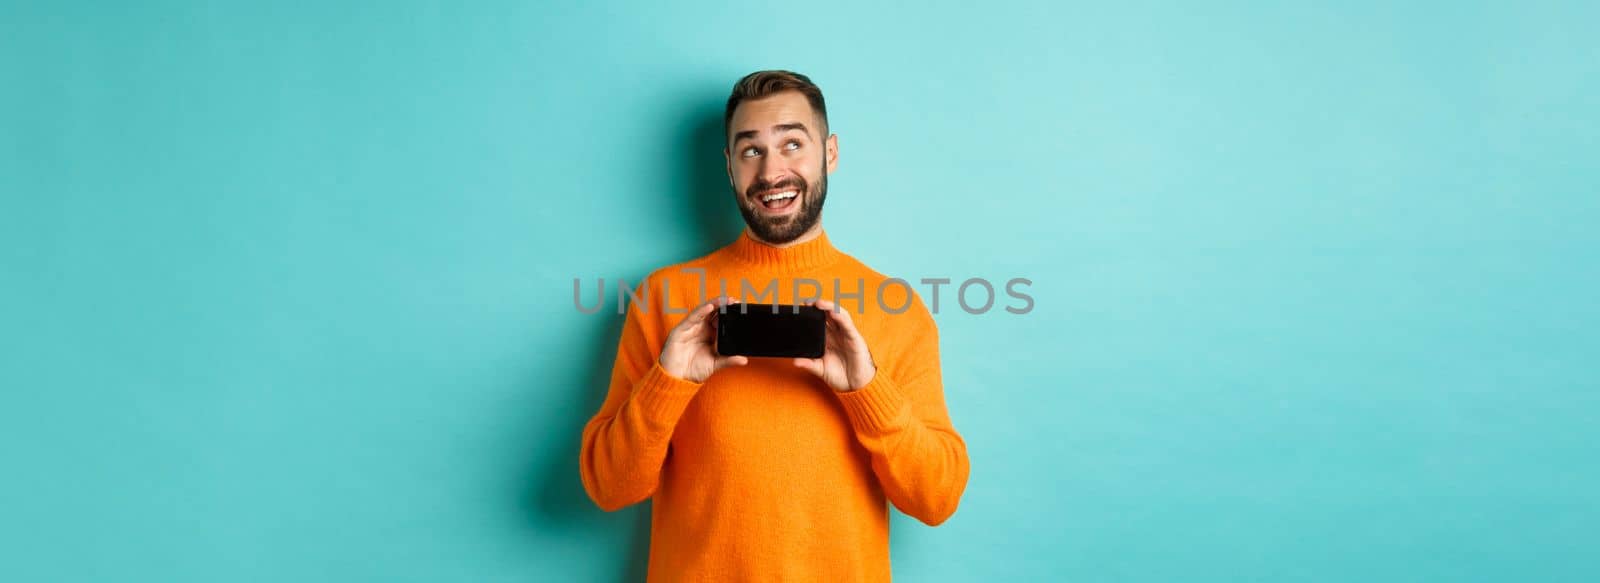 Online shopping. Young man thinking and showing smartphone screen, looking dreamy at upper left corner, standing over light blue background.